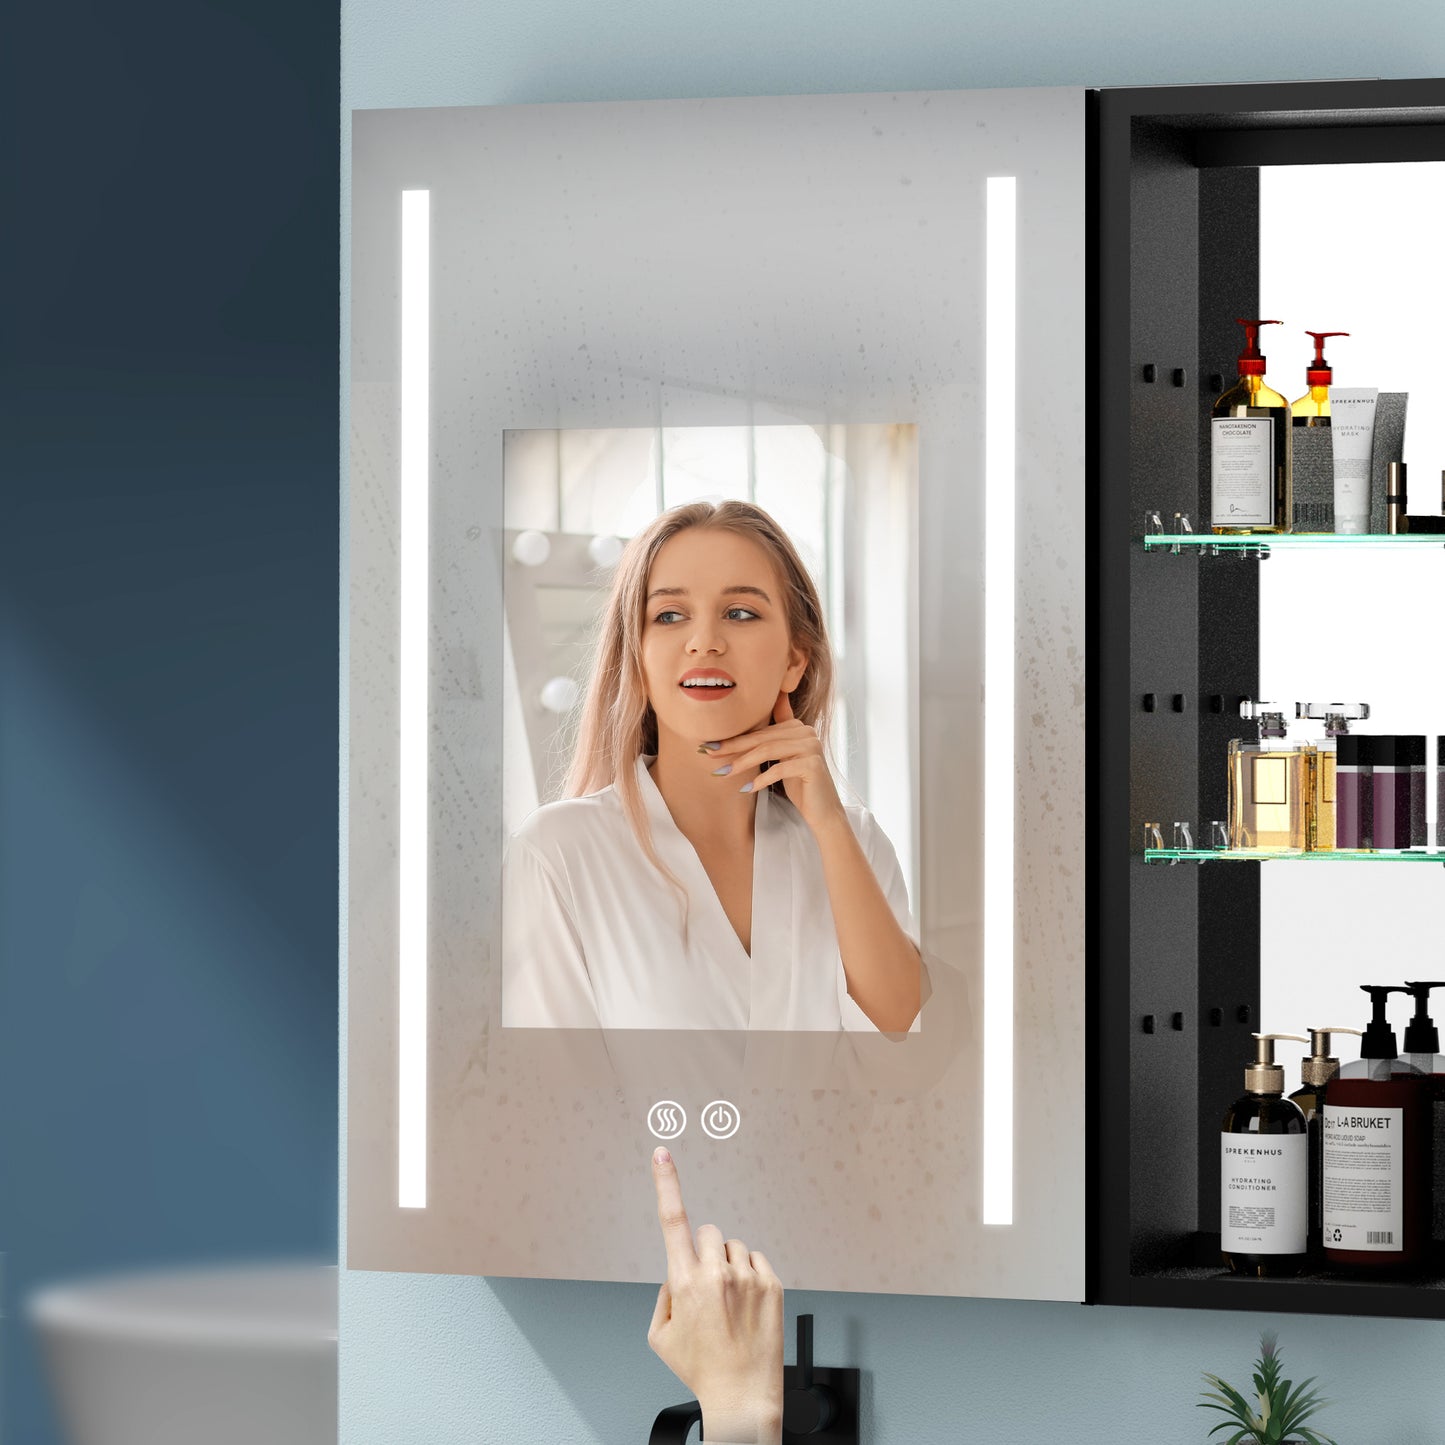 30x30 Inch Bathroom Medicine Cabinets Surface Mounted Cabinets With Lighted Mirror Left Defogging, Small Cabinet No Door